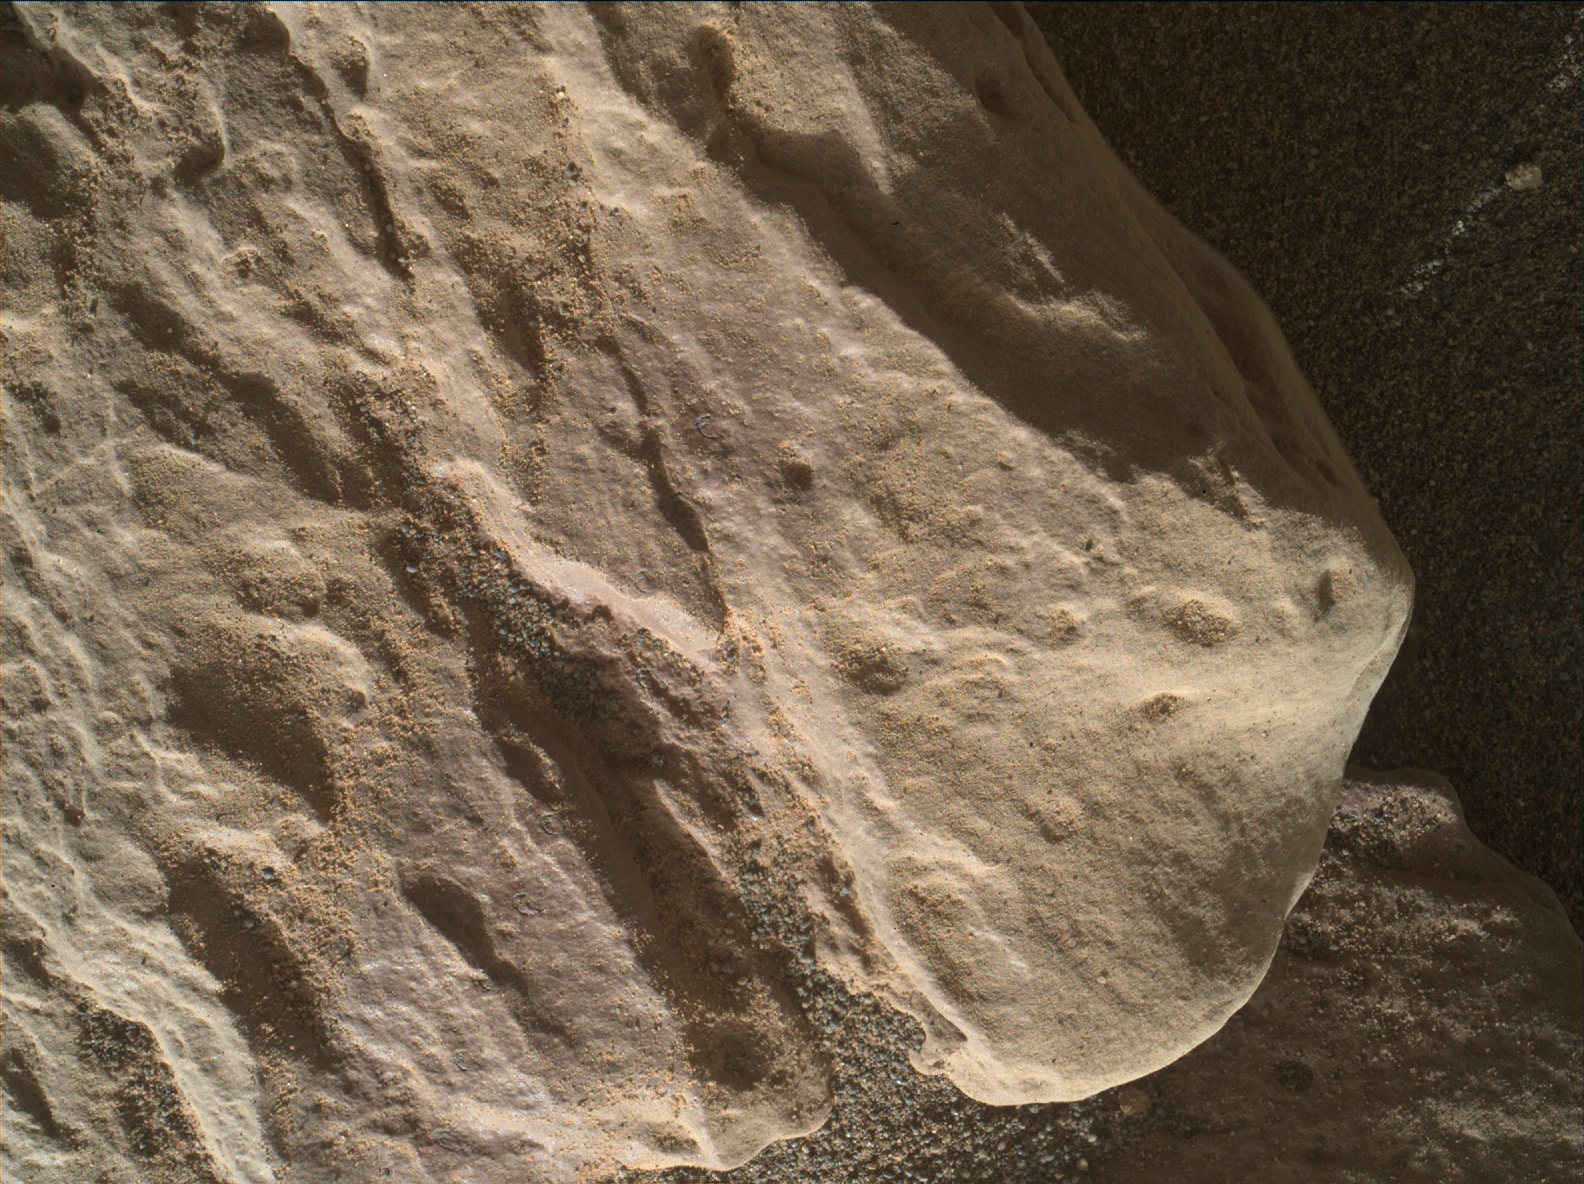 Nasa's Mars rover Curiosity acquired this image using its Mars Hand Lens Imager (MAHLI) on Sol 1949